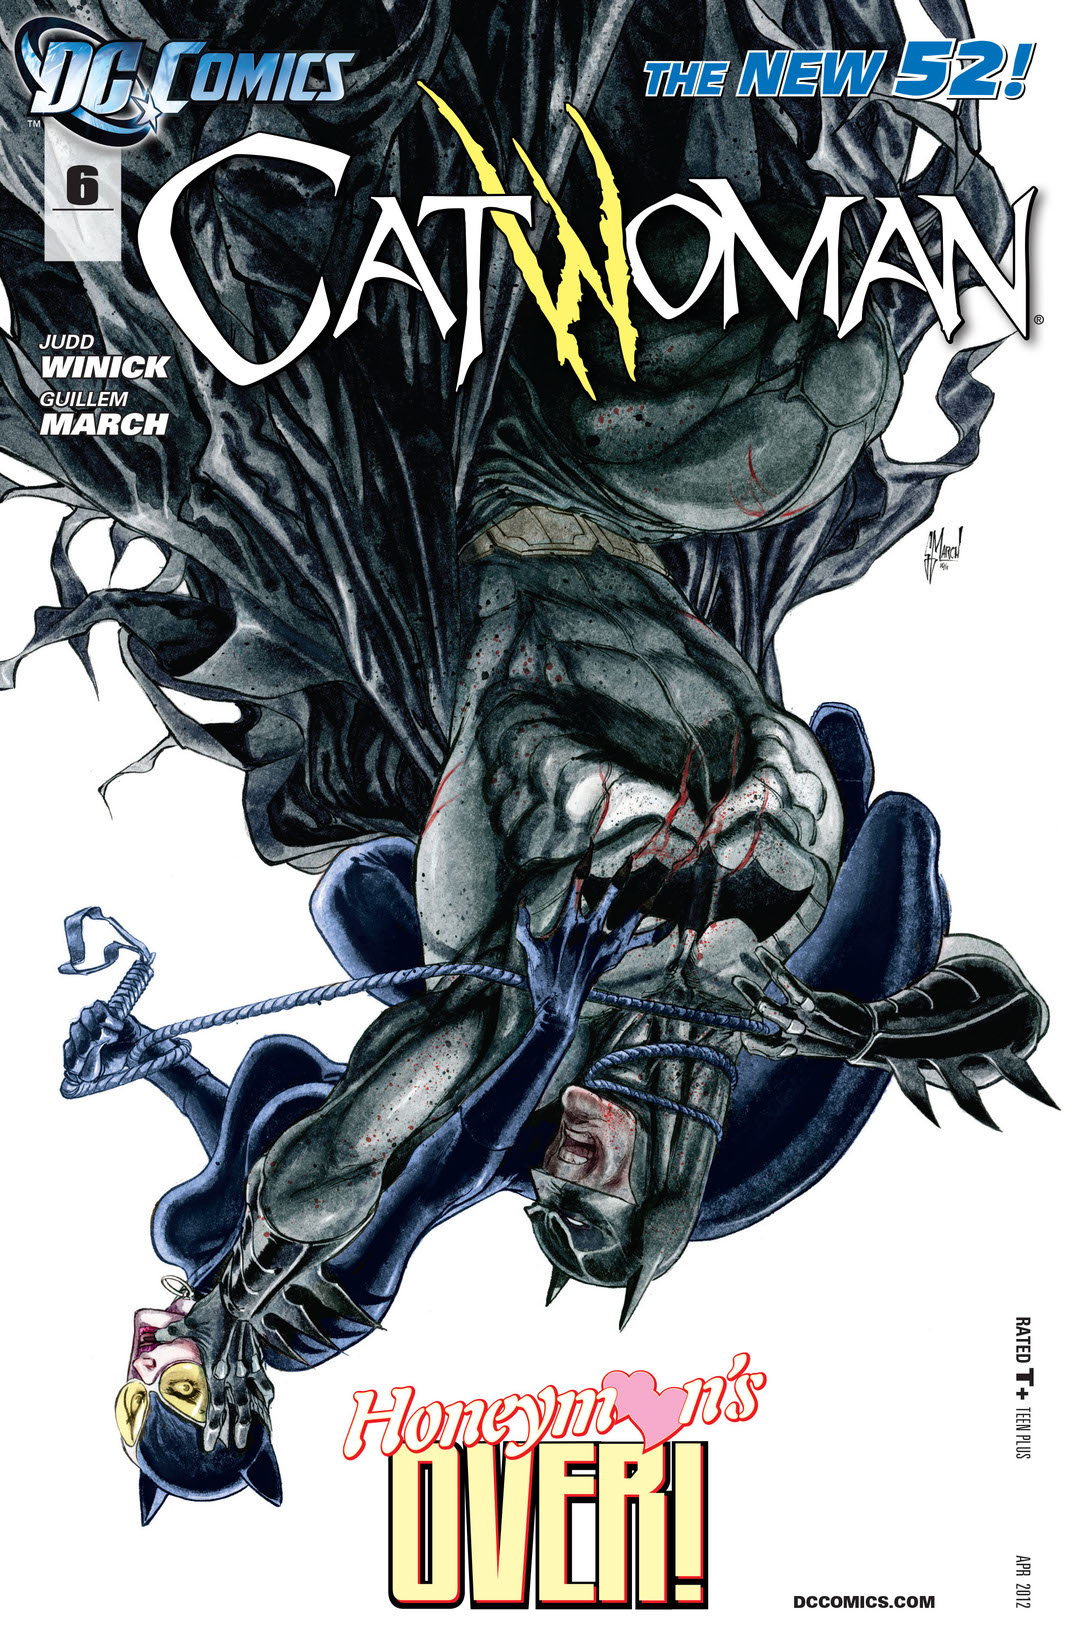 Catwoman (2011-) #6 preview images